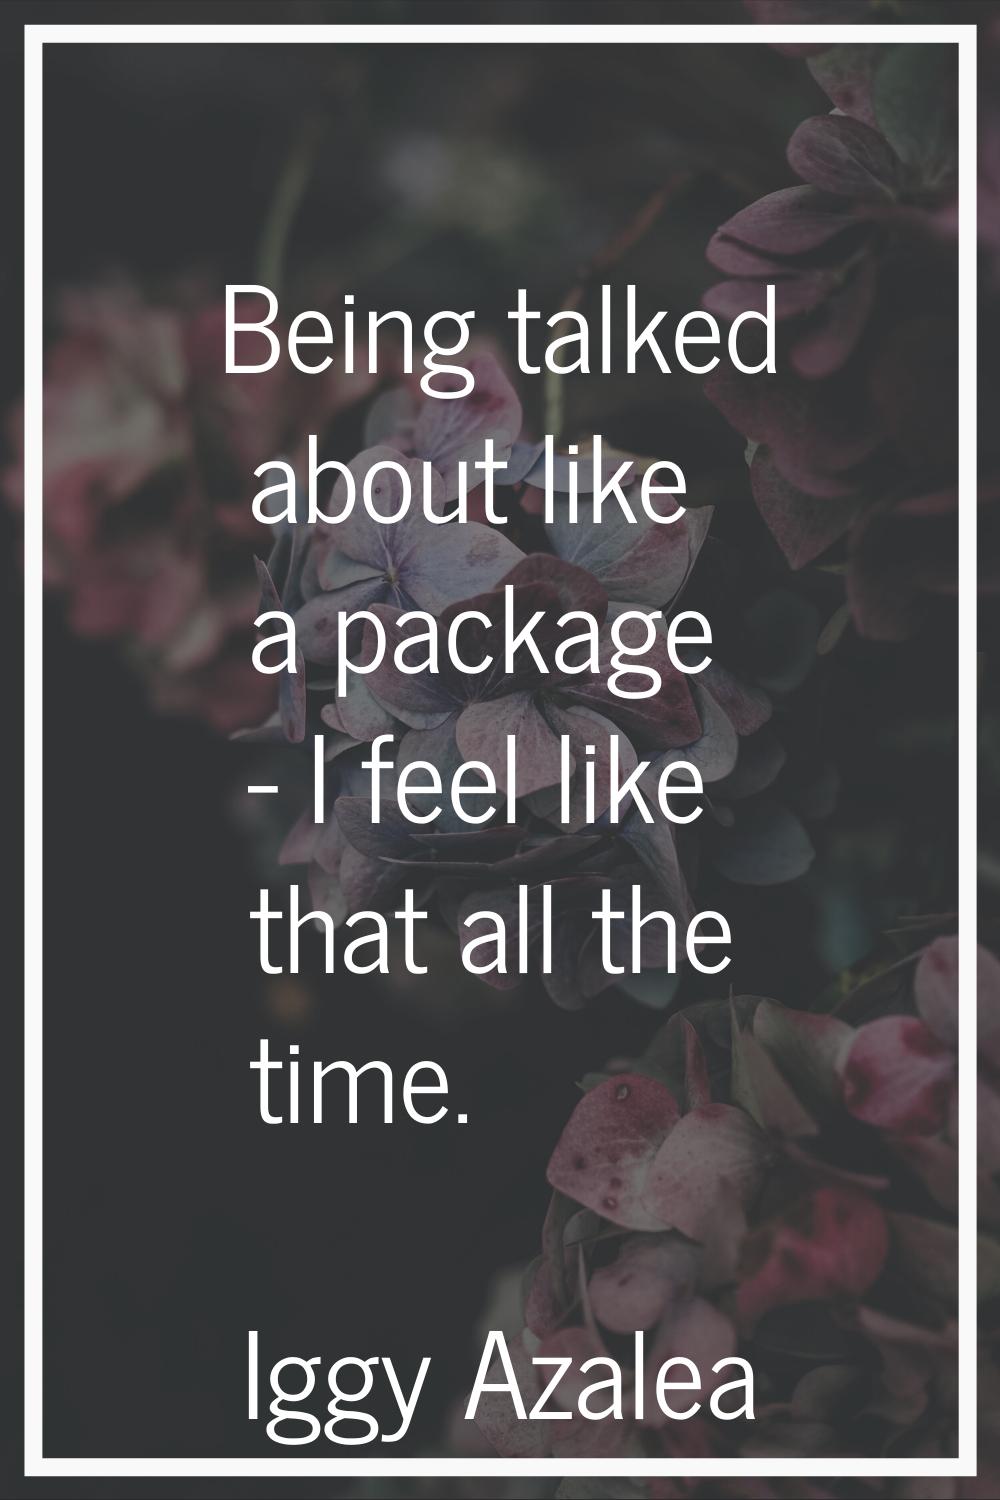 Being talked about like a package - I feel like that all the time.